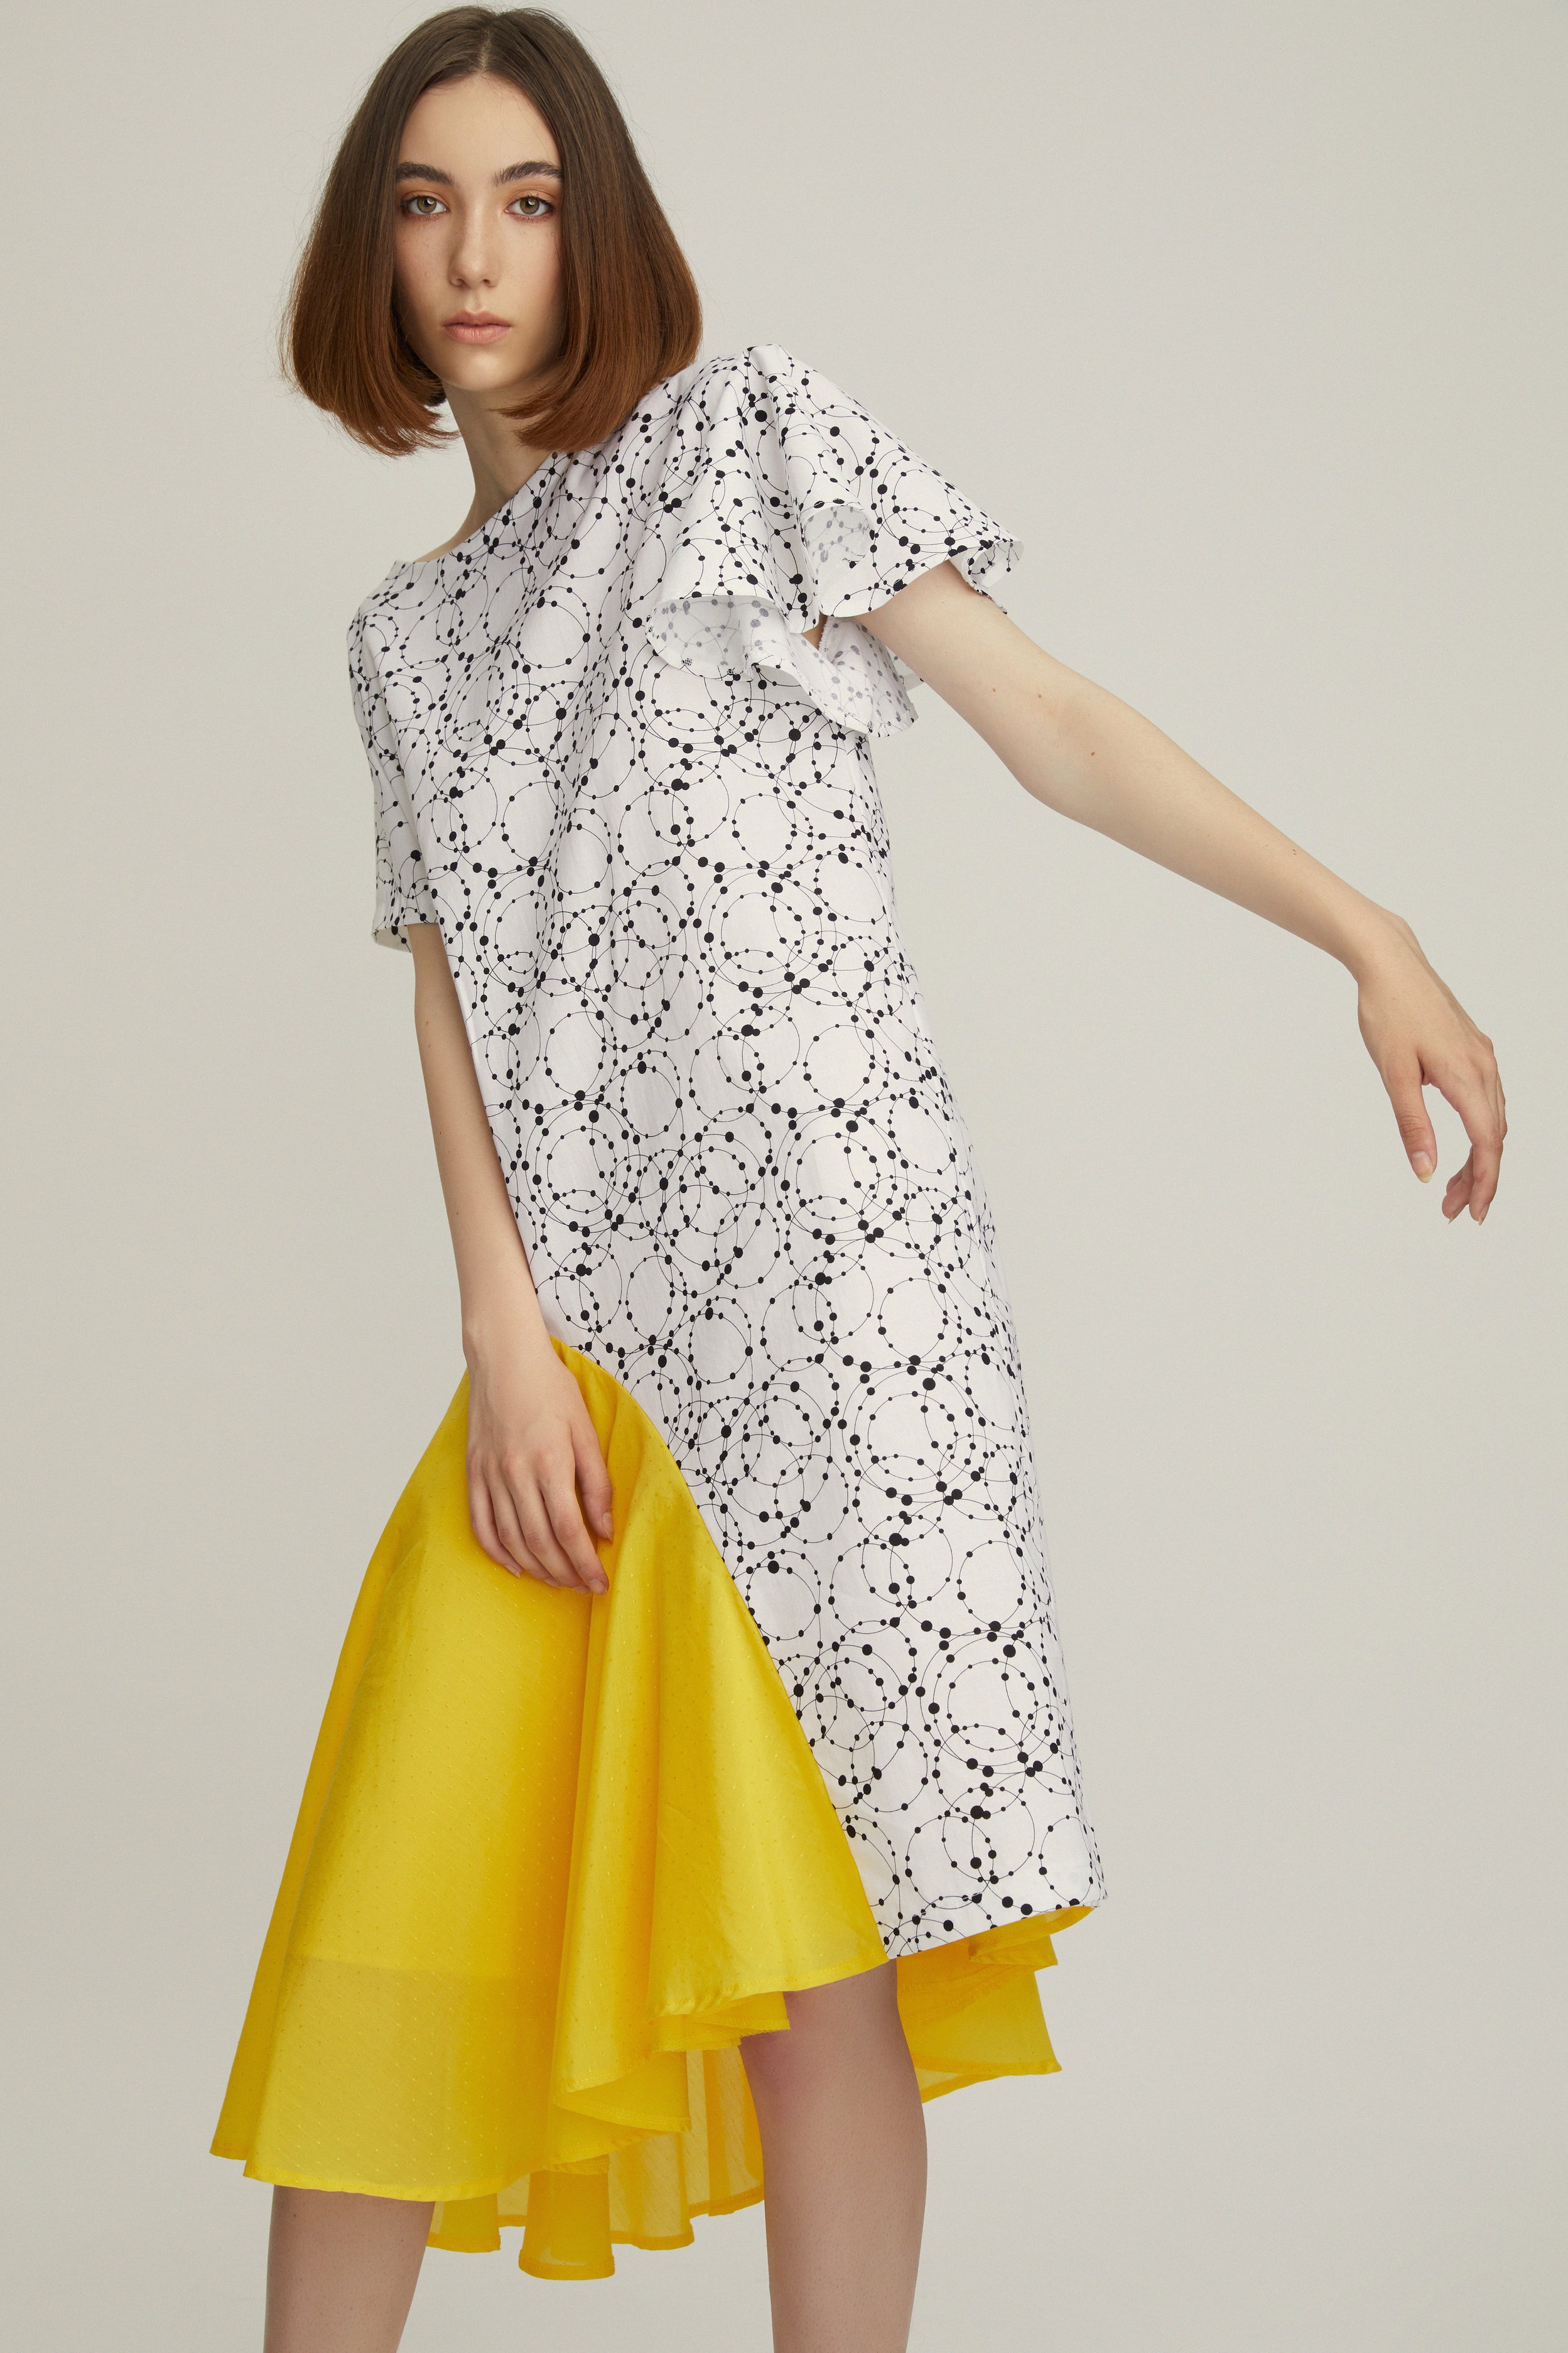 A modern construction, this dress has a back V-neck with a removable yellow dotted silk cord. The sleeves epitomize diversity, you will notice one angled sleeve and one draped. Made from pure cotton with a thick, tactile quality, it has a straight fit and falls just above the knee.